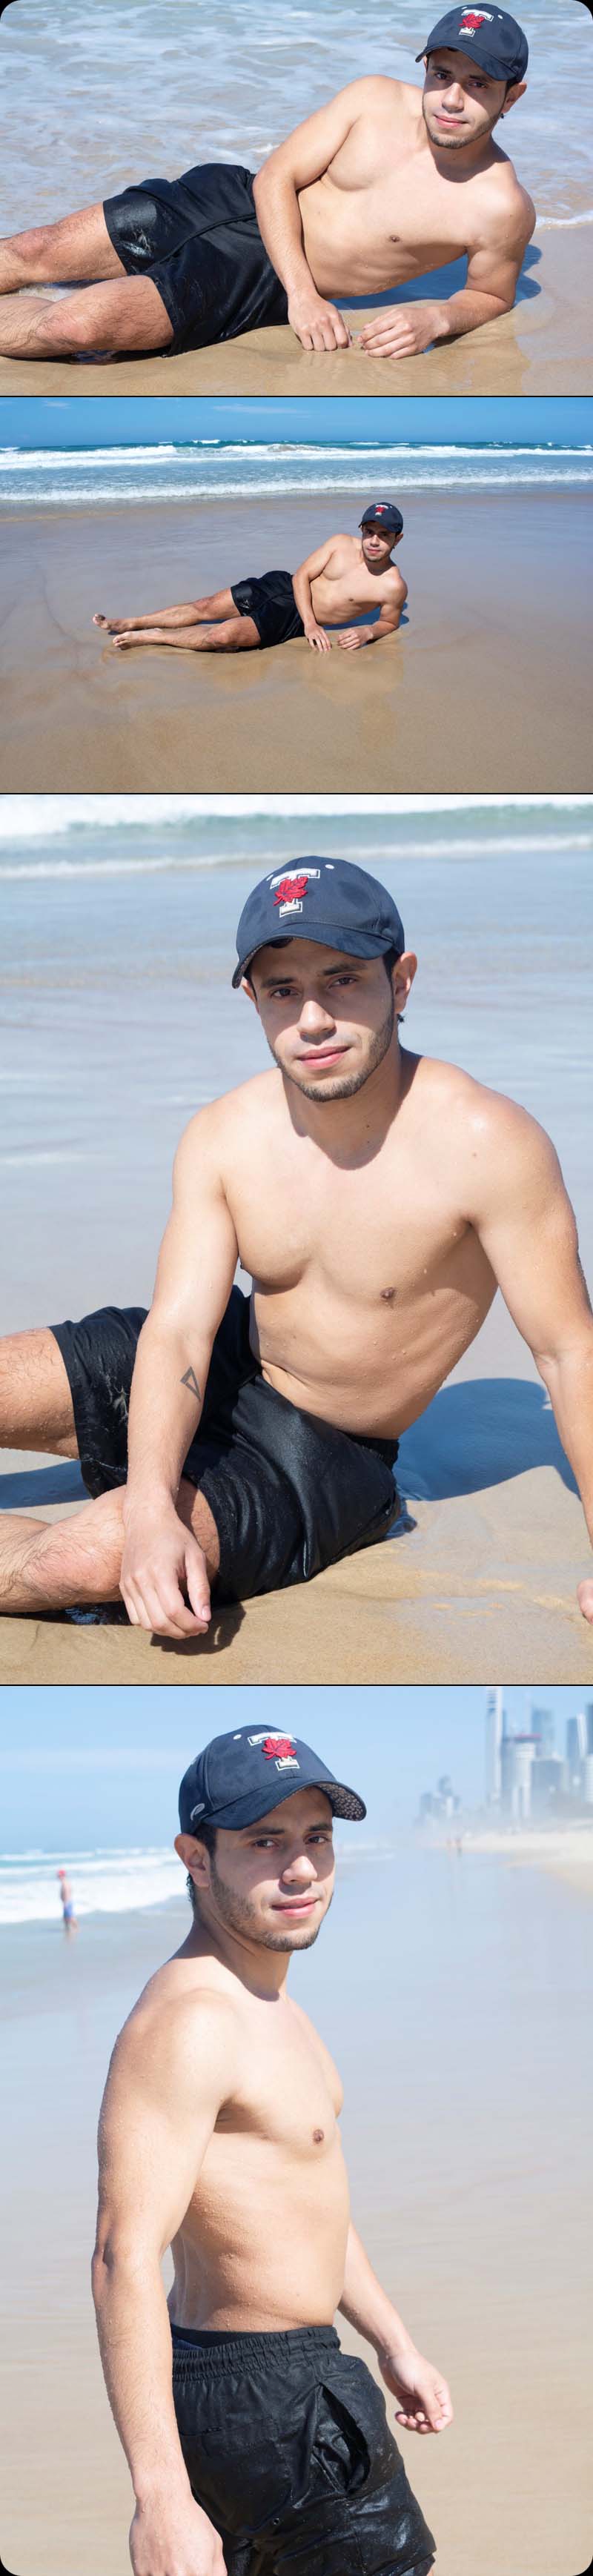 Andres [24, Soccer Player, Gold Coast] at All Australian Boy